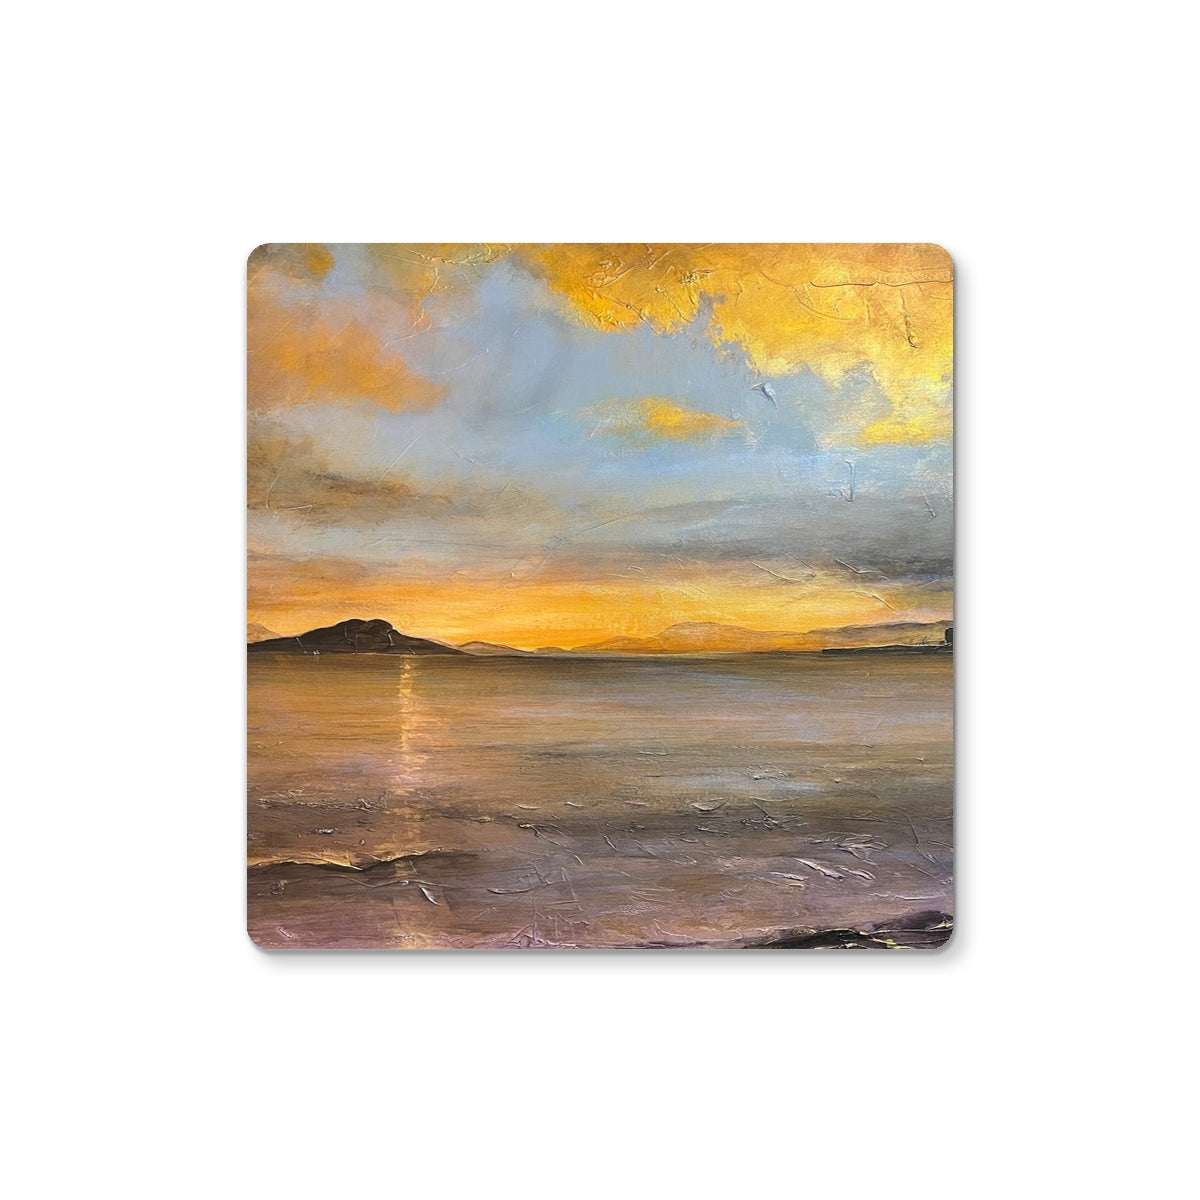 Loch Linnhe Sunset Art Gifts Coaster-Homeware-Scottish Lochs & Mountains Art Gallery-2 Coasters-Paintings, Prints, Homeware, Art Gifts From Scotland By Scottish Artist Kevin Hunter